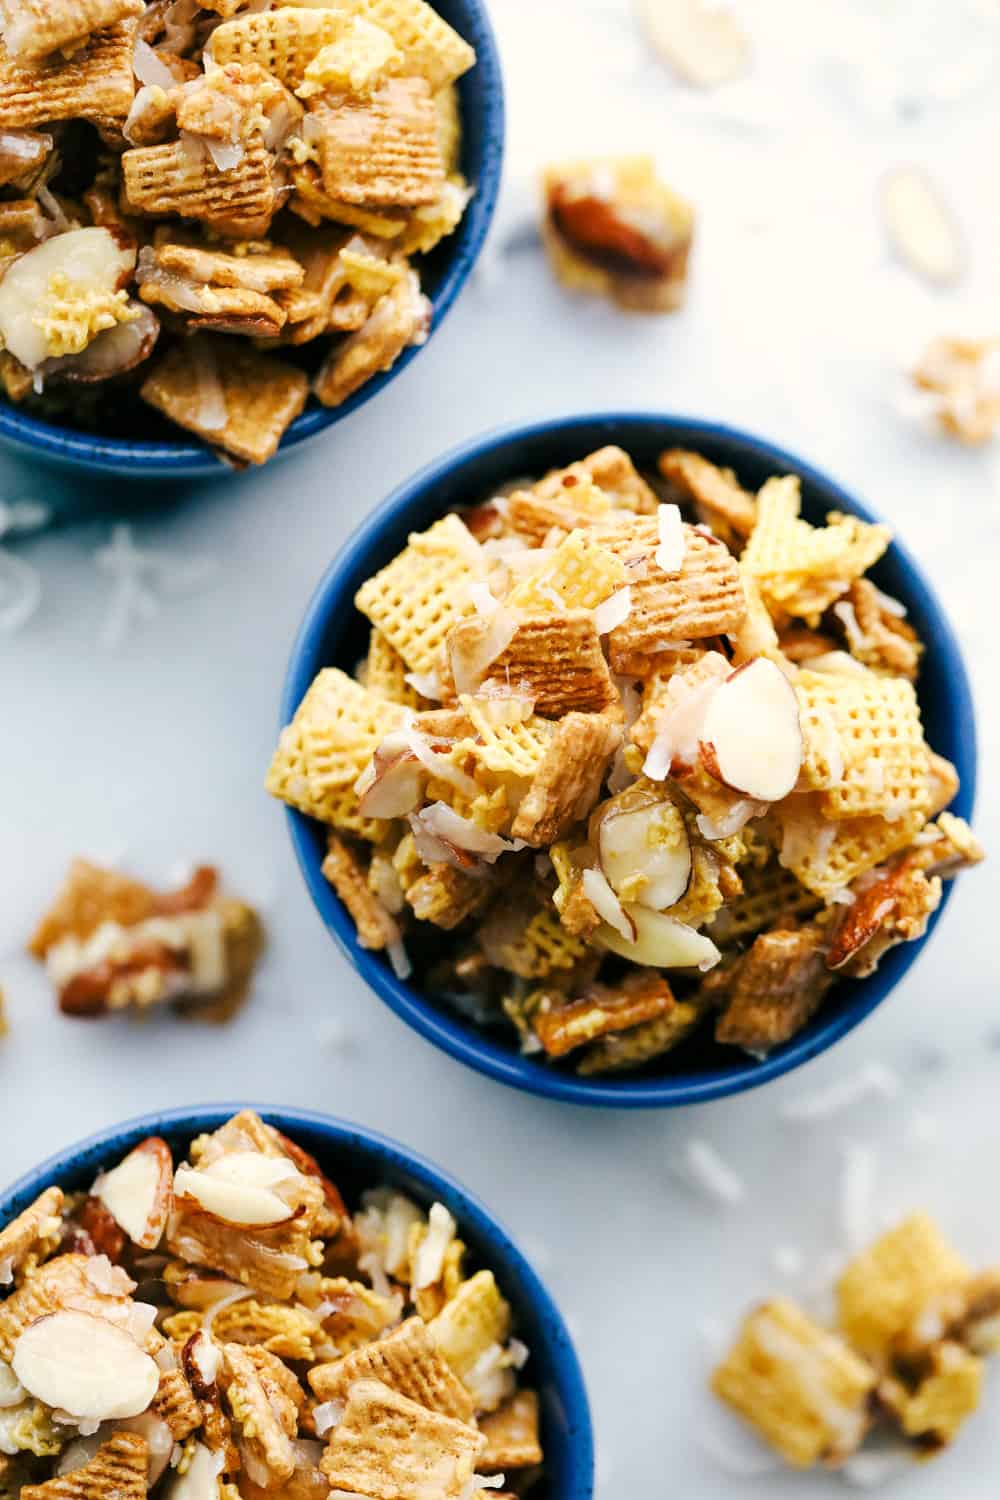 Ooey gooey Chex mix in a bowl